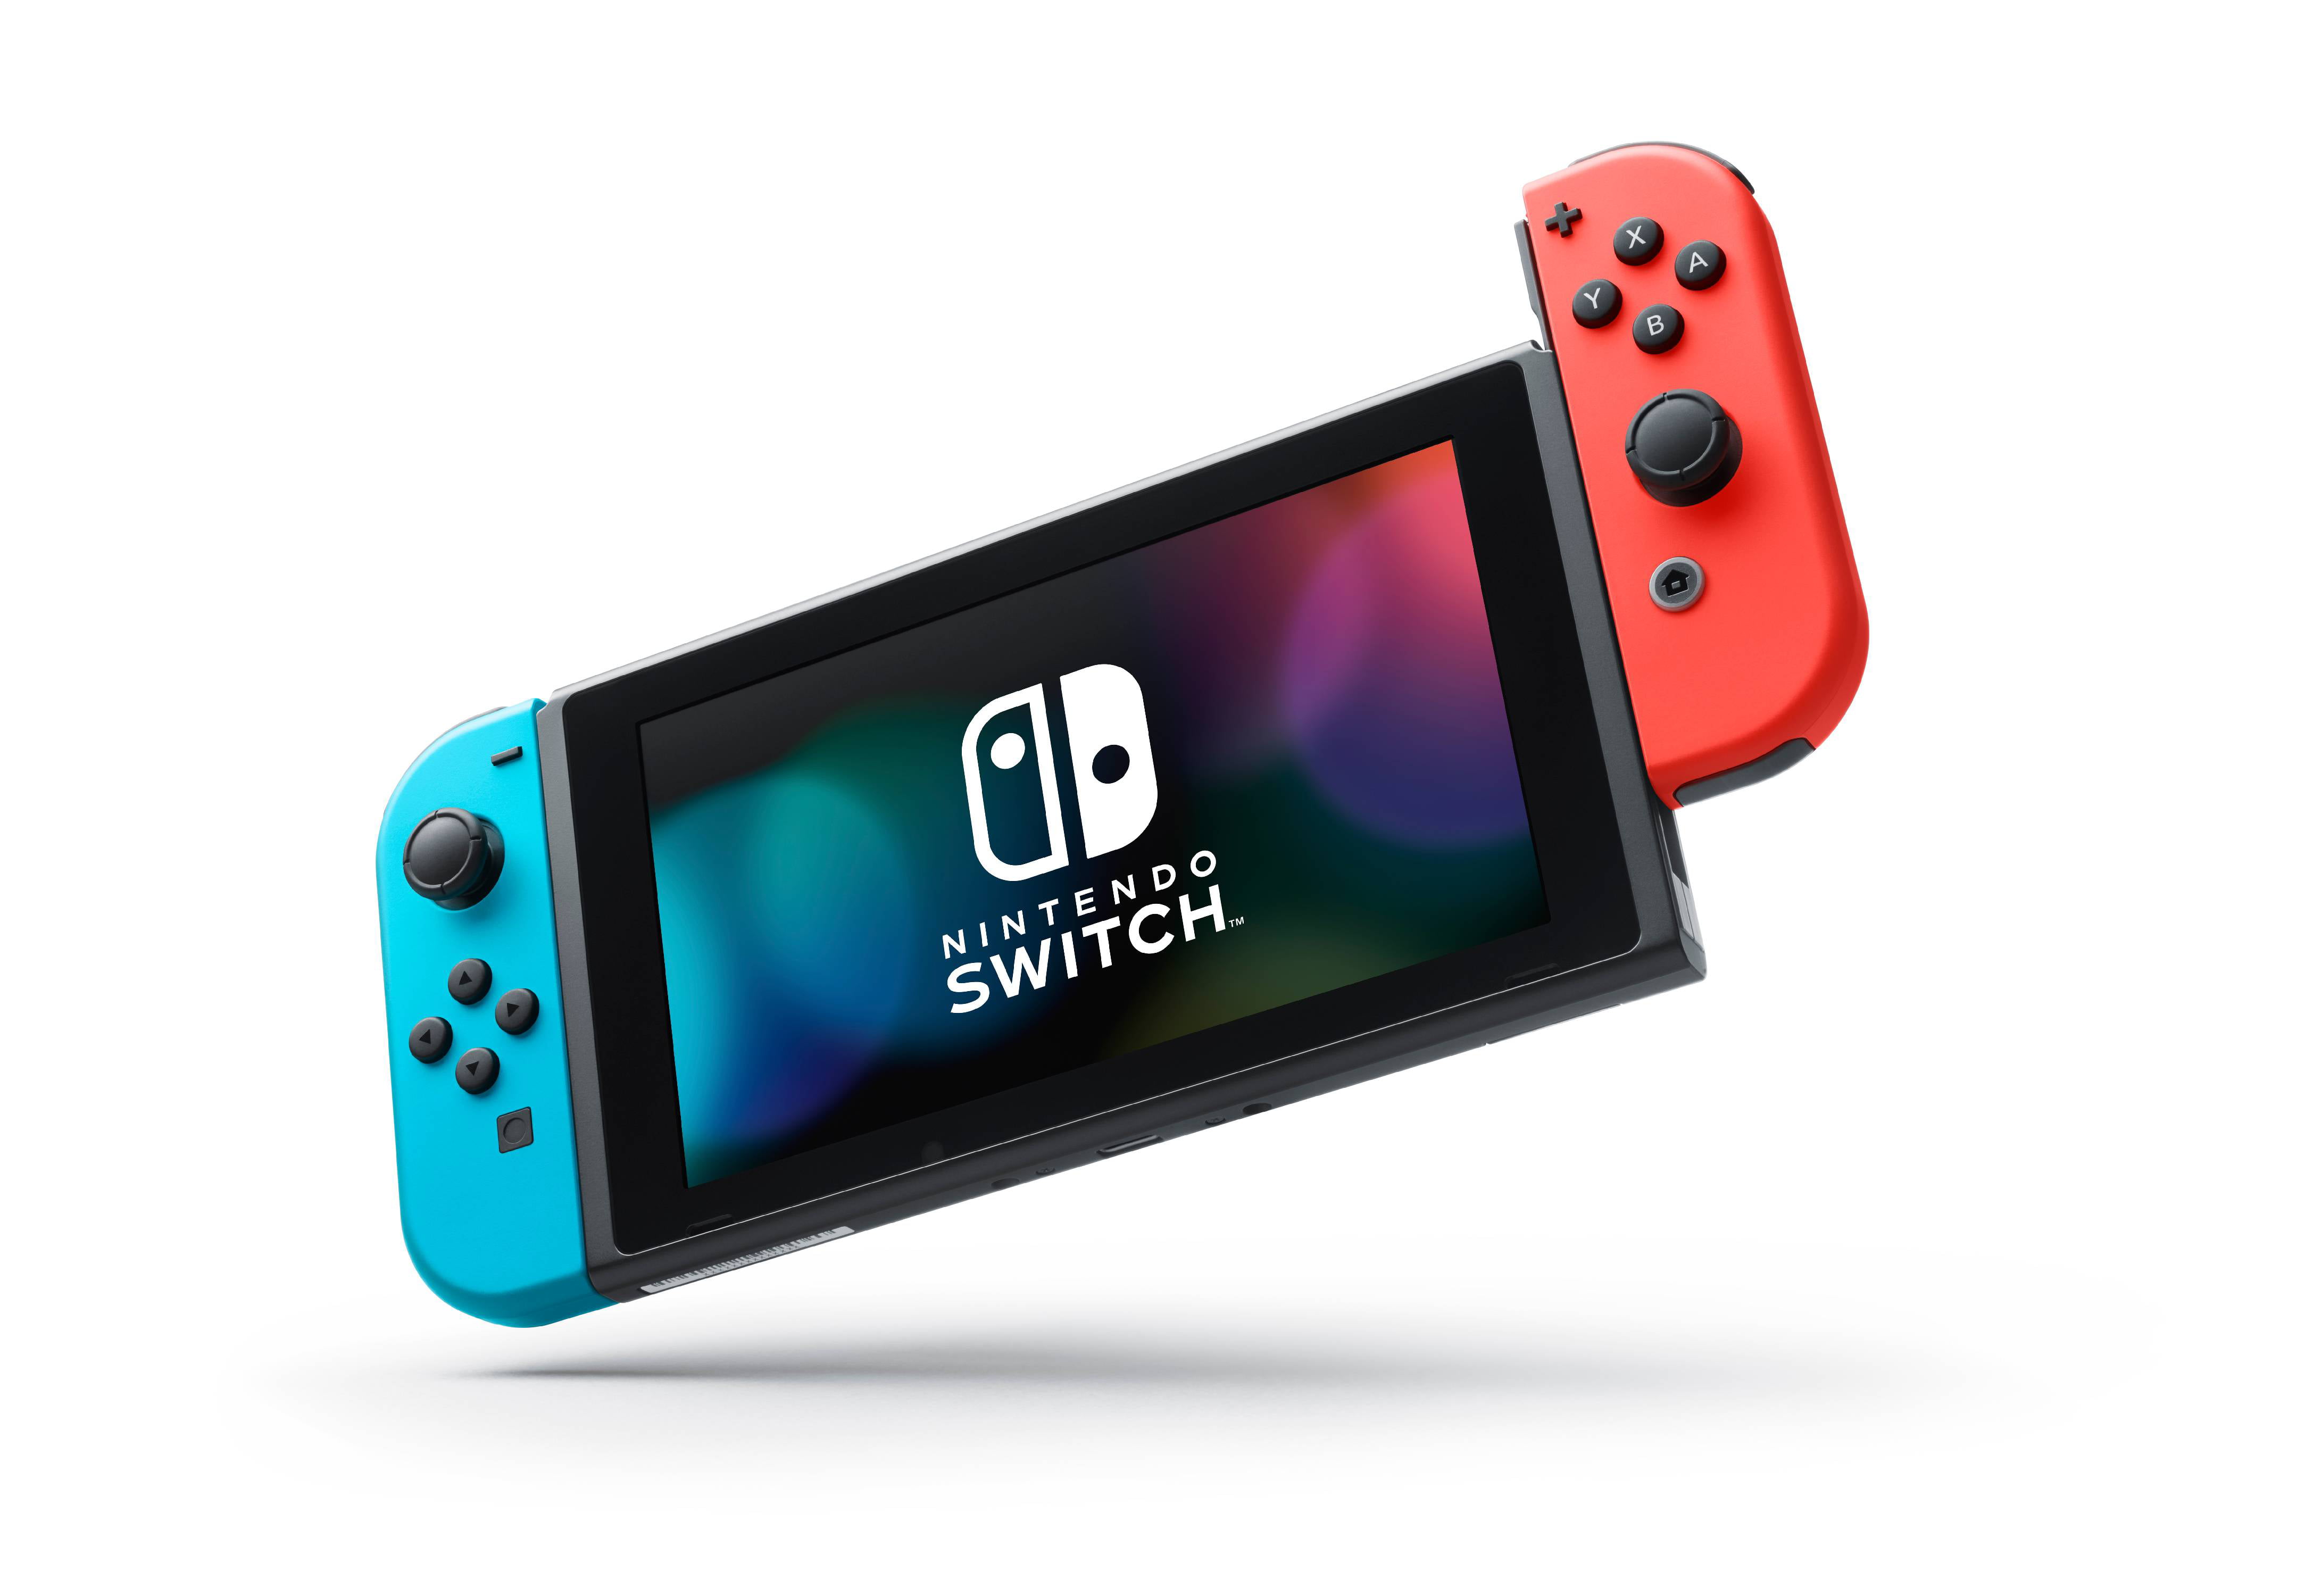 Nintendo Switch Gaming Console Neon Blue and Neon Red Joy-Con